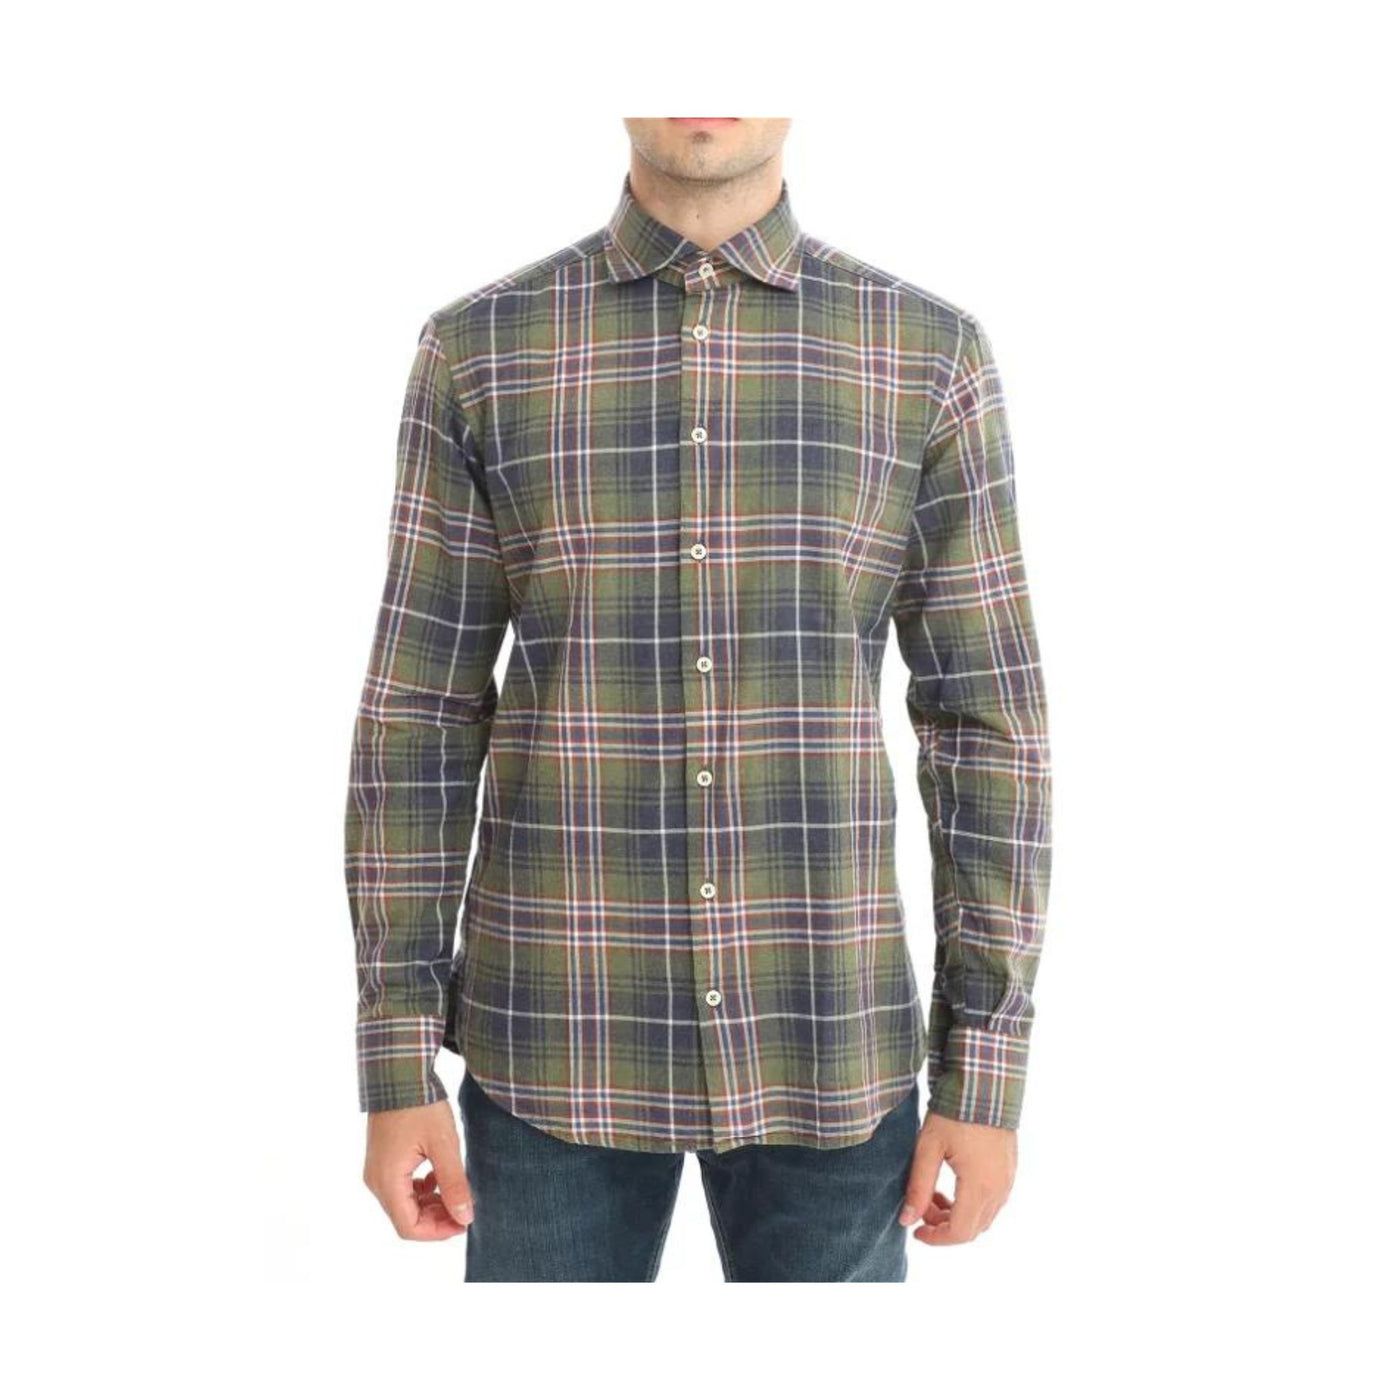 Green and blue checked men's shirt